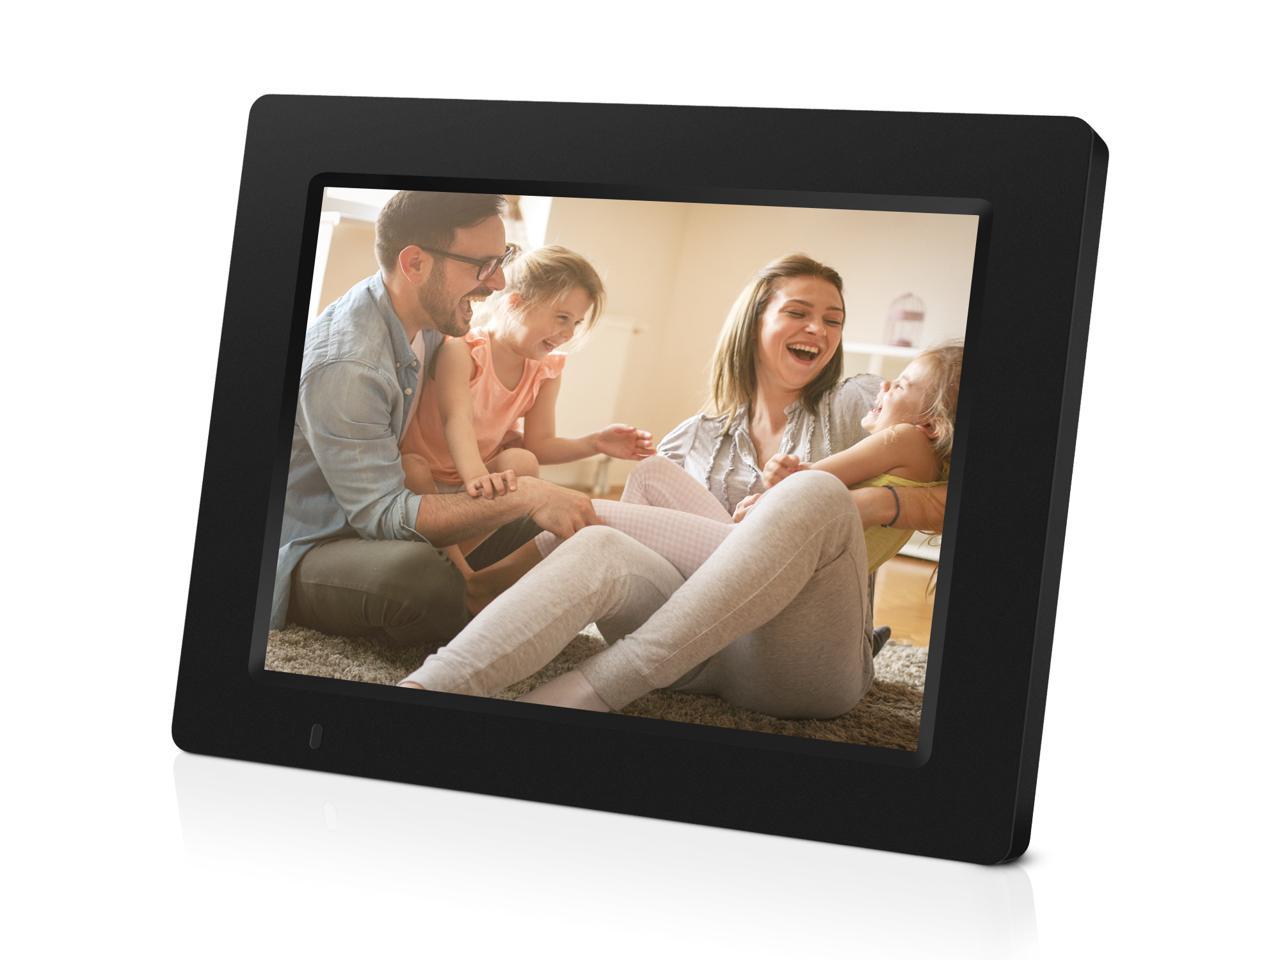 iDeaPLAY DF801 7.85 inch WiFi Digital Photo Frame, 1024x768 HD Display, 8GB Internal Storage, iOS & Android App, Support Photo, Music, Built-in Speaker